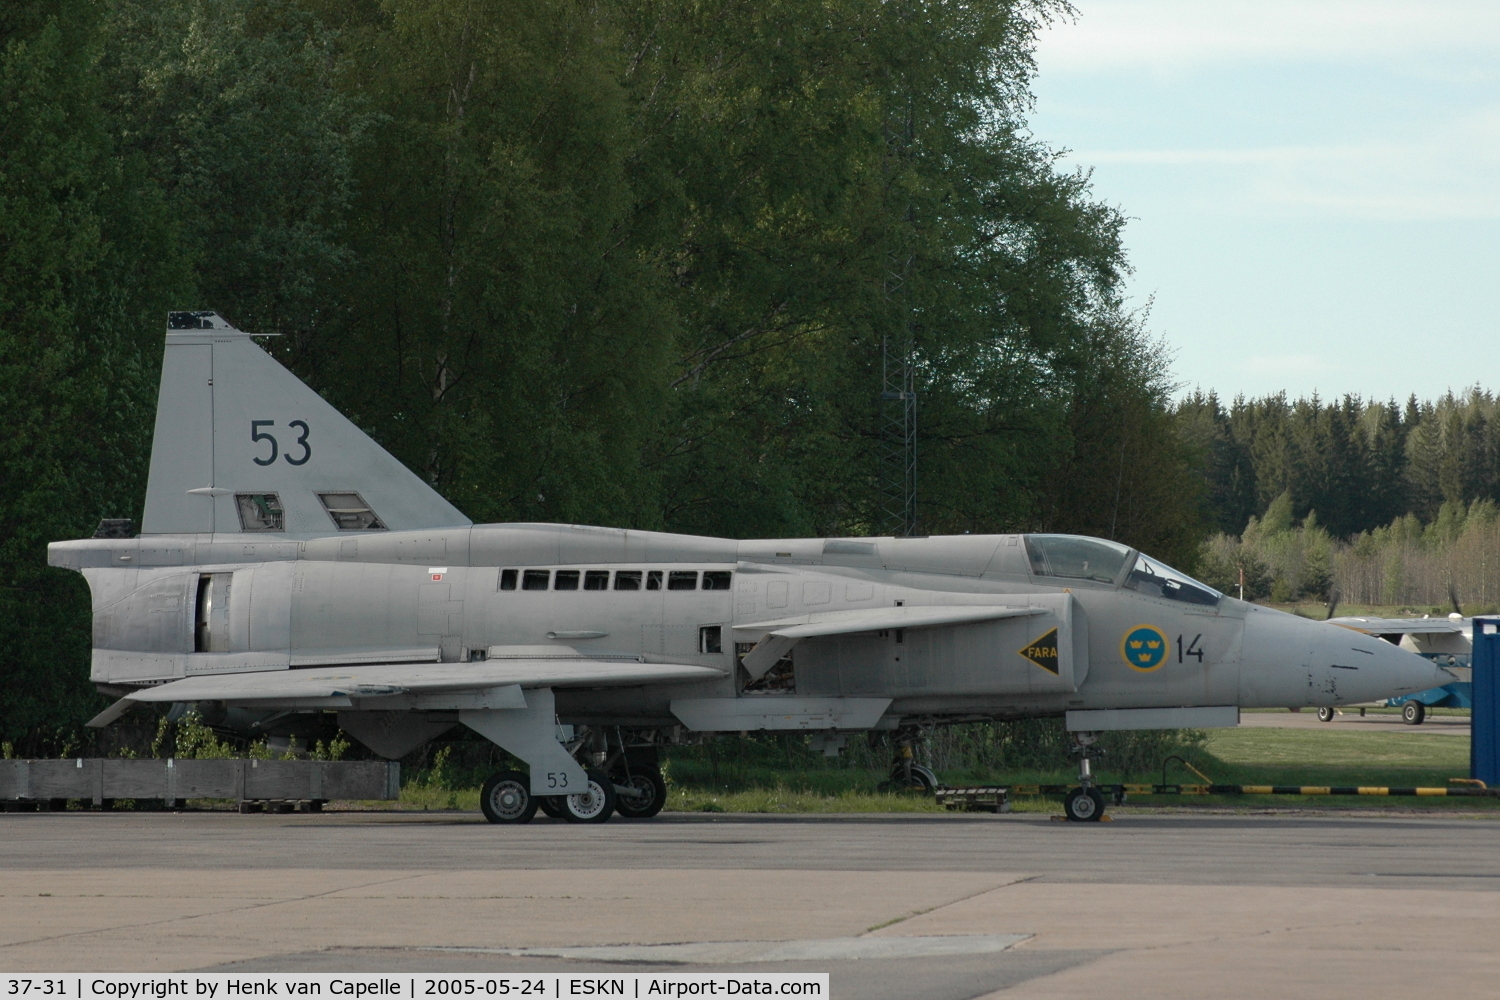 37-31, Saab AJ37 Viggen C/N 373, Saab AJ37 Viggen parked on the platform of Skavsta airport, Nyköping, Sweden. At the time it was used by the Gripen technical school located at the airport.